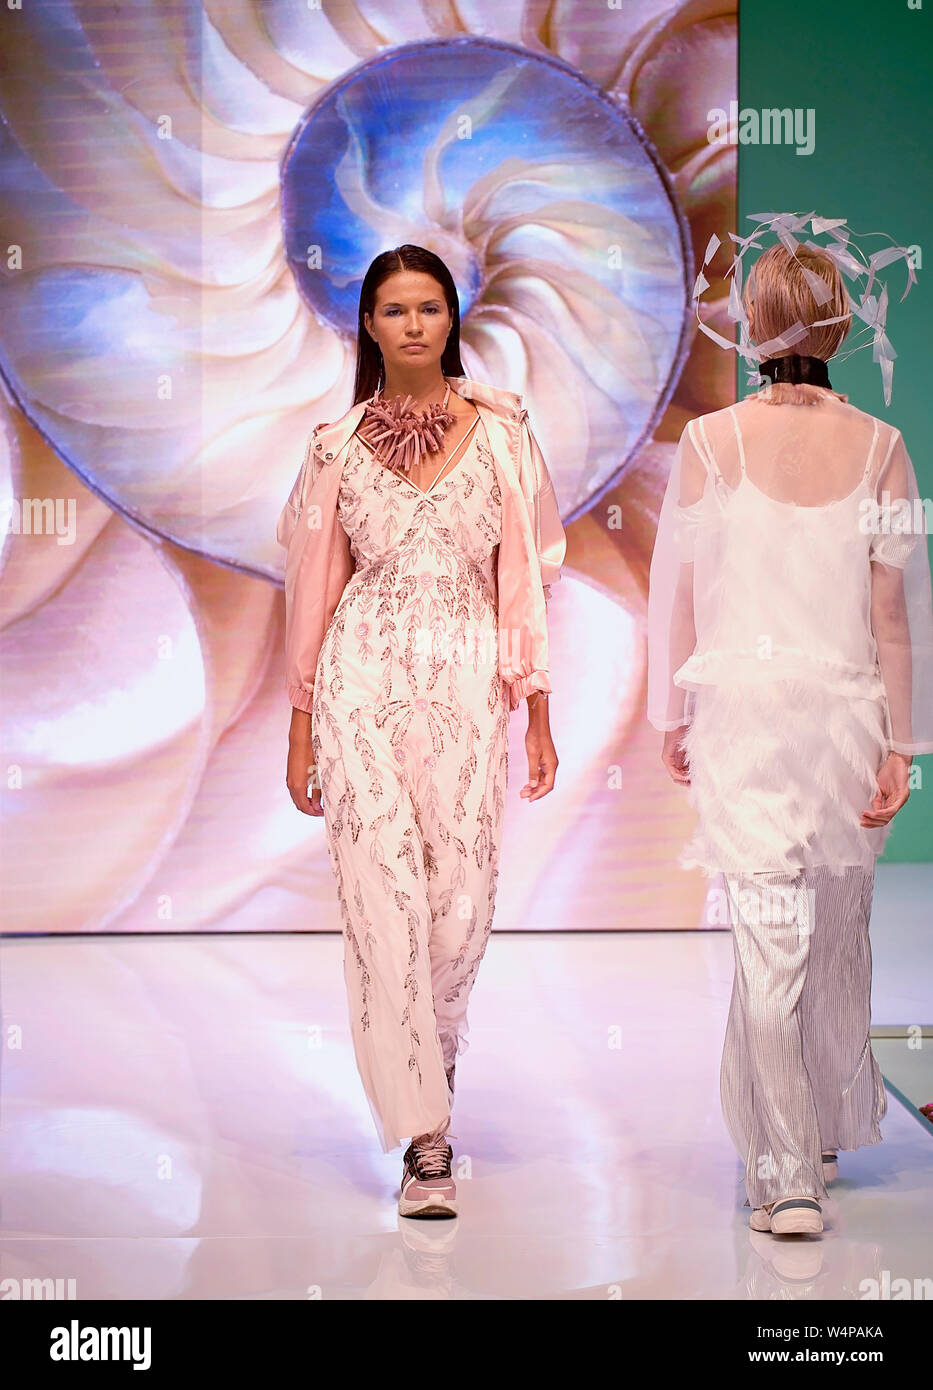 Pure London 2019 runway shows - fashion trends for next season - taken on 21st July at Olympia Kensington. Stock Photo